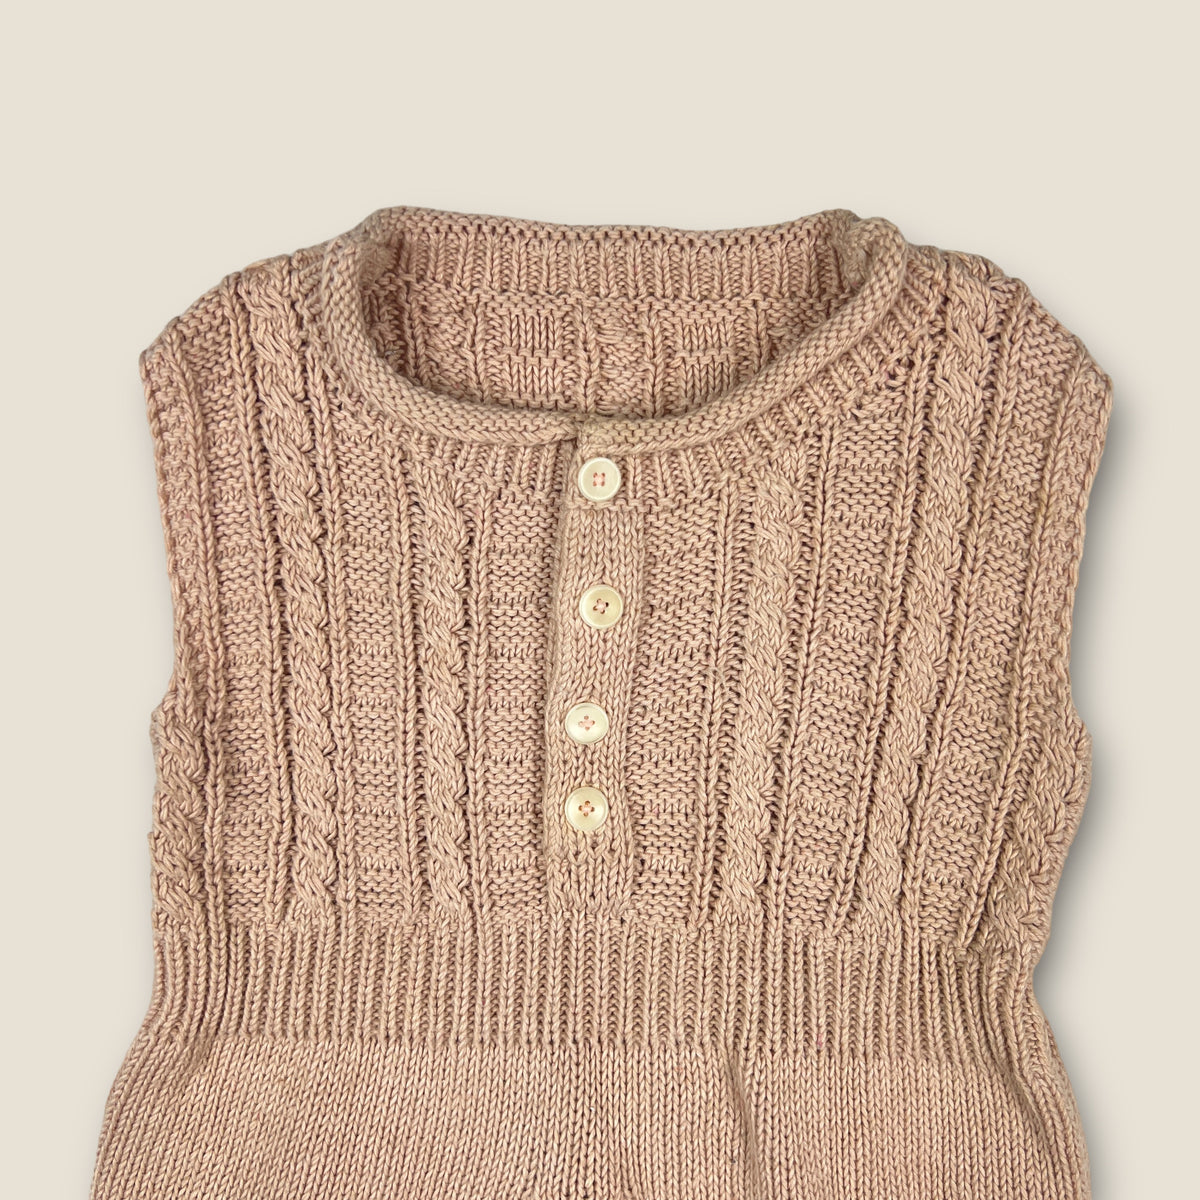 Mabli Knitted Romper size 12 months